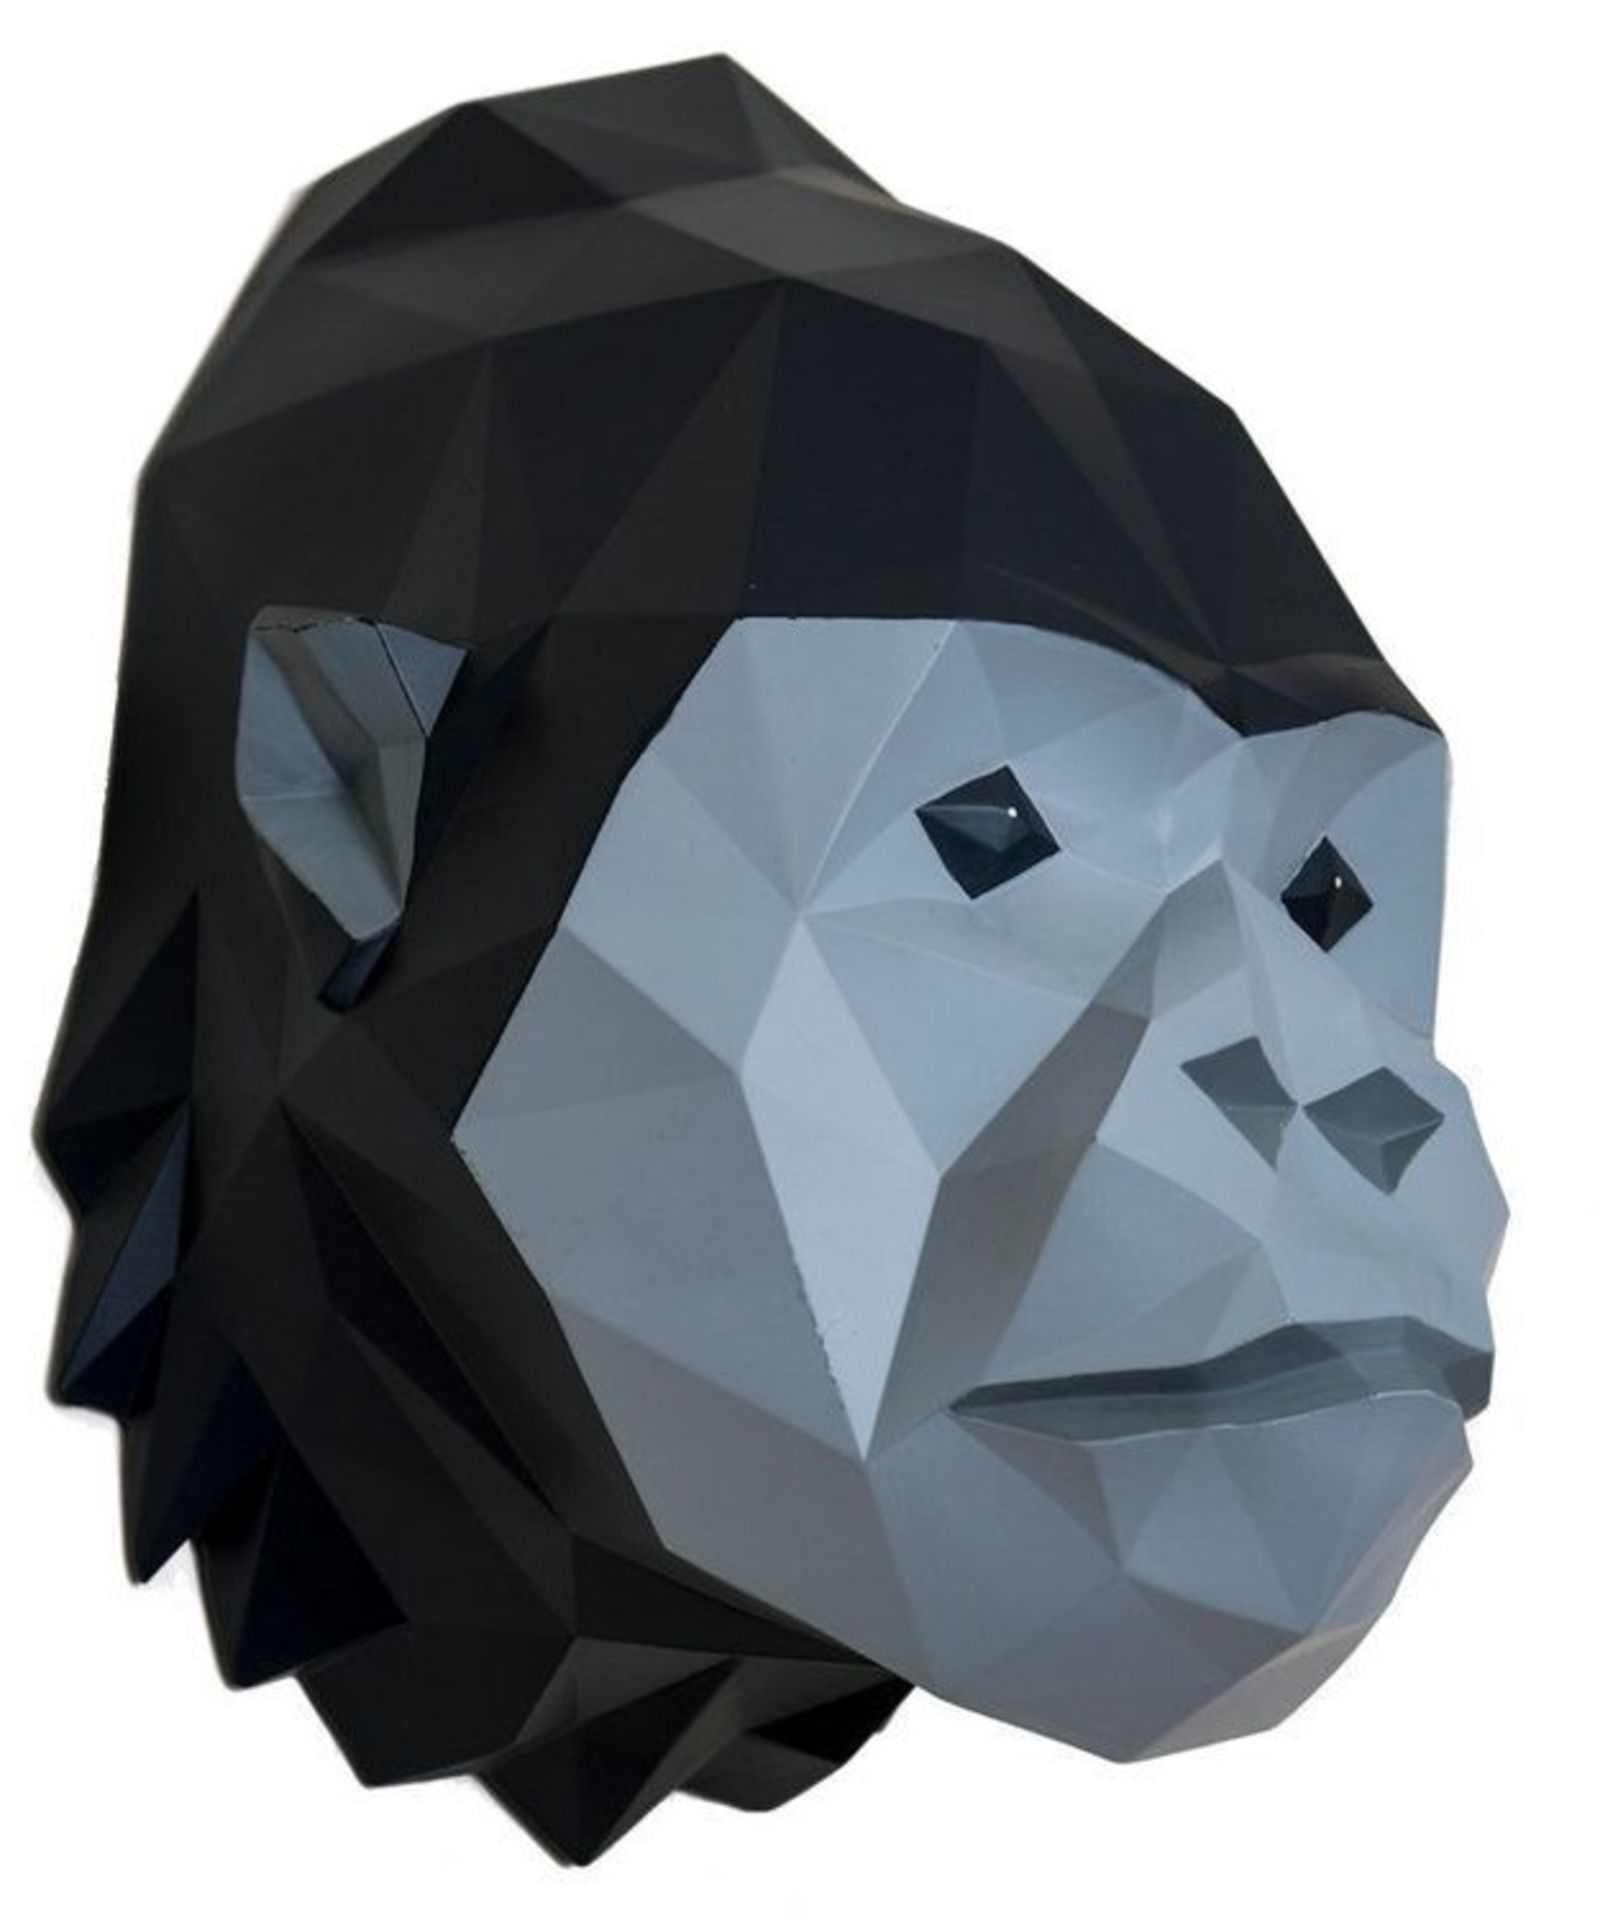 1 x Artistic Origami Gorilla Head Abstract Wall Hanging - Dimensions H37cm W31cm D24cm - Brand New